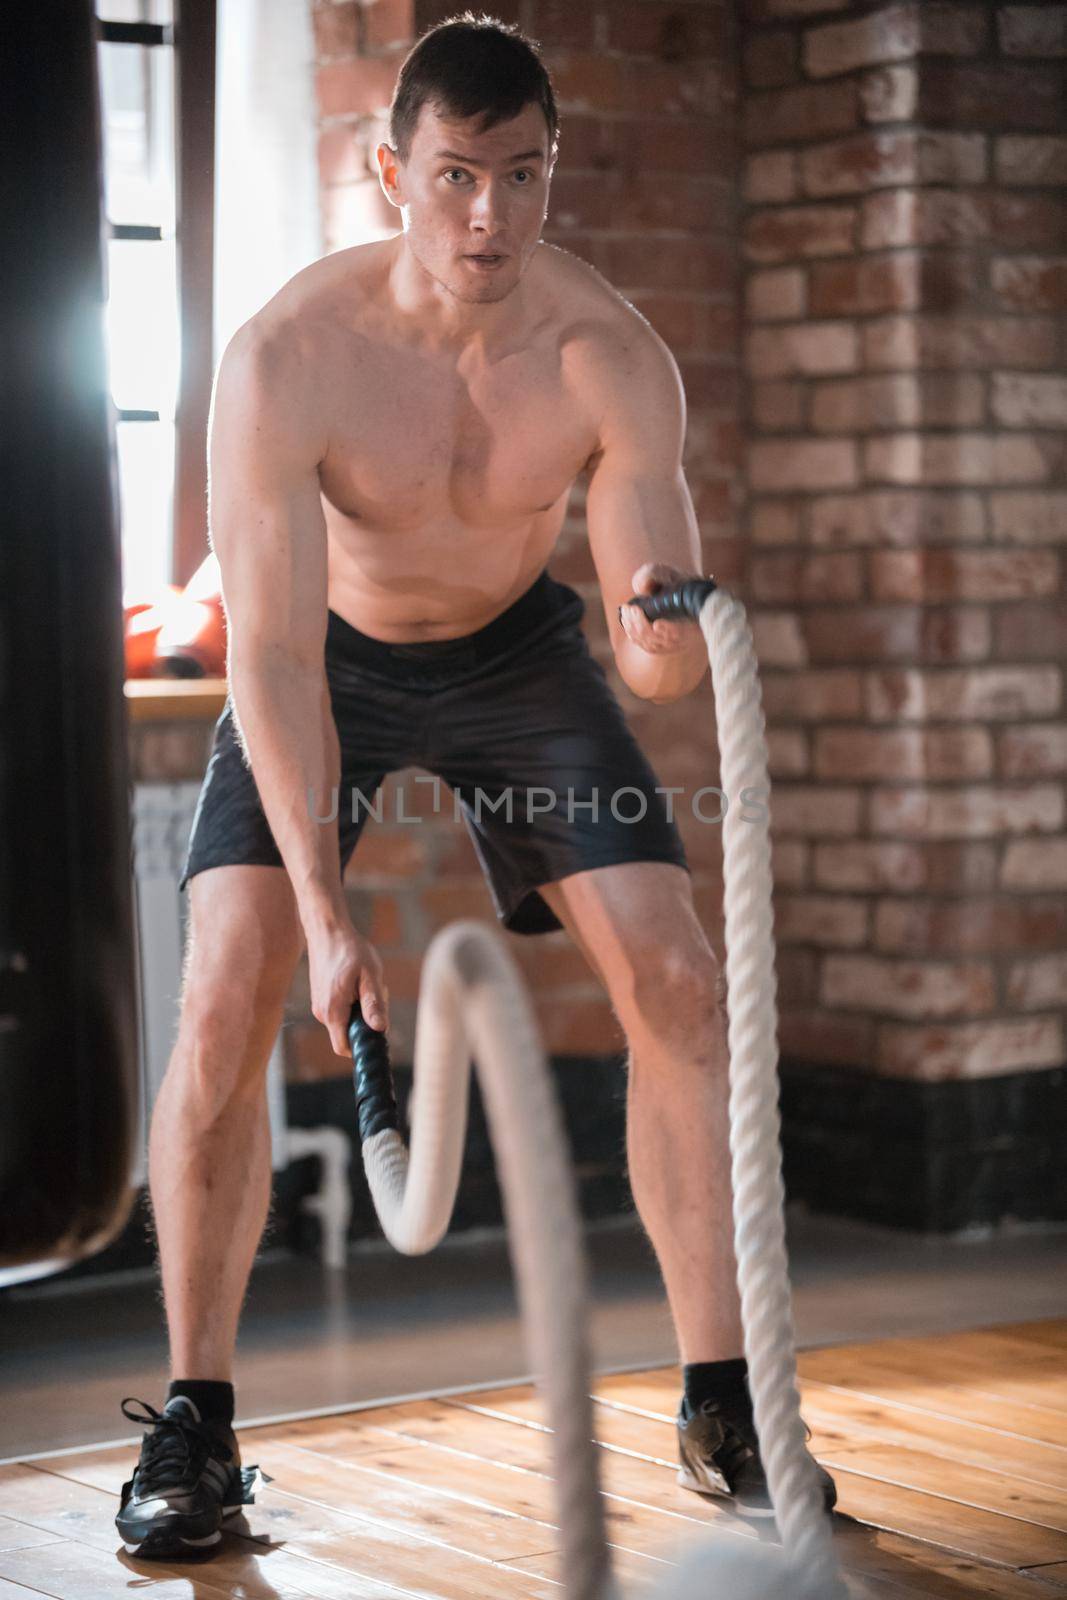 A concentrated man on training in the gym. Training his hands with ropes hitting on the floor. Mid shot